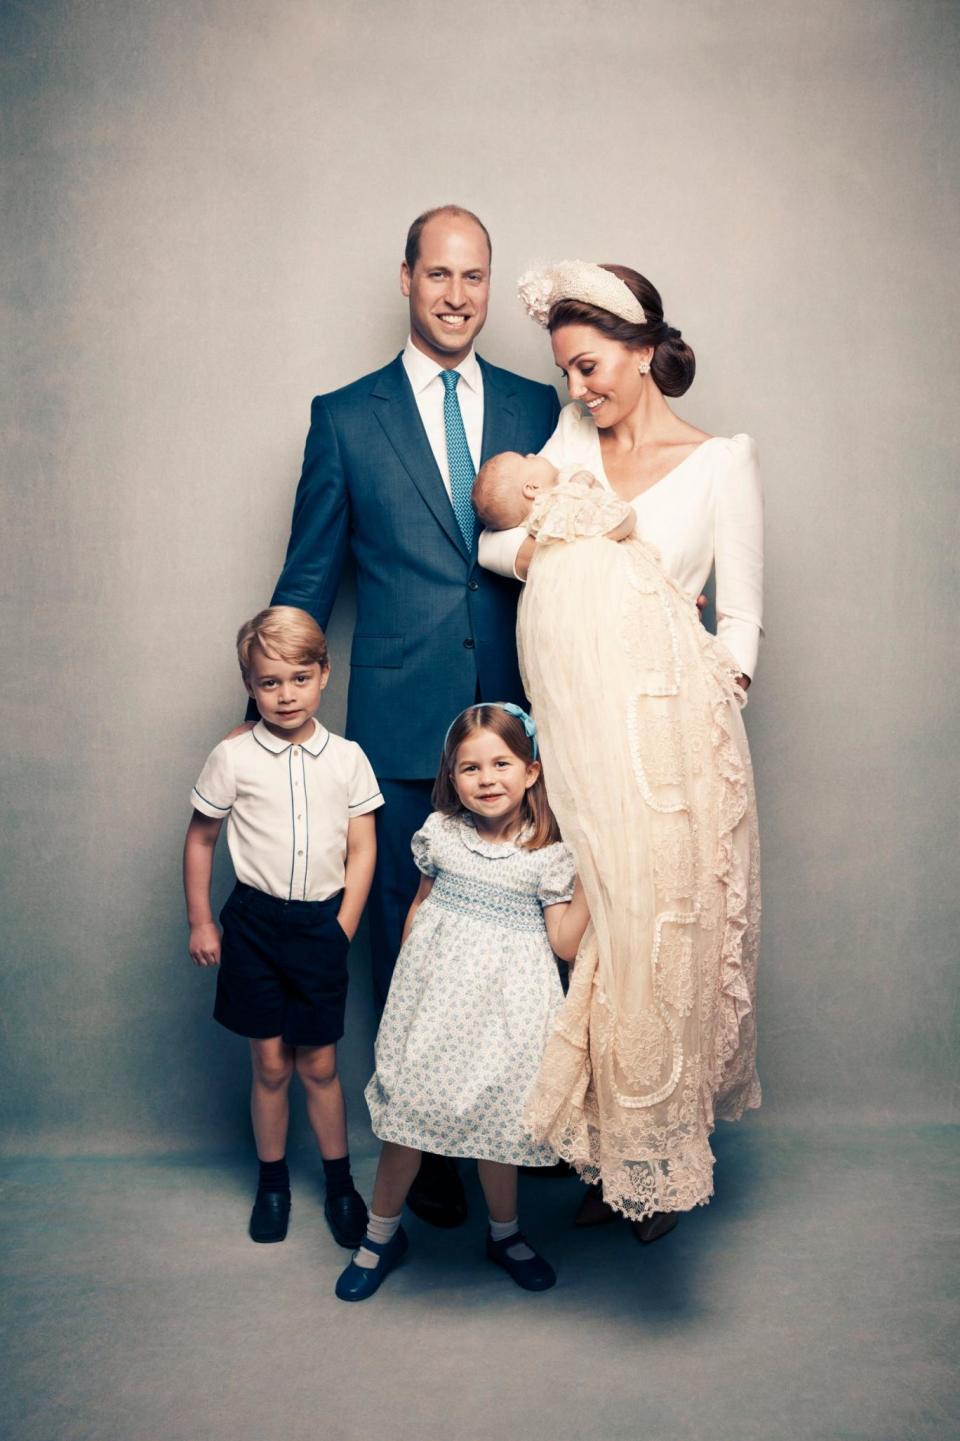 A family photograph of the Duke and Duchess of Cambridge with their three children Prince George, princess Charlotte and Prince Louis (Matt Holyoak/Camera Press)